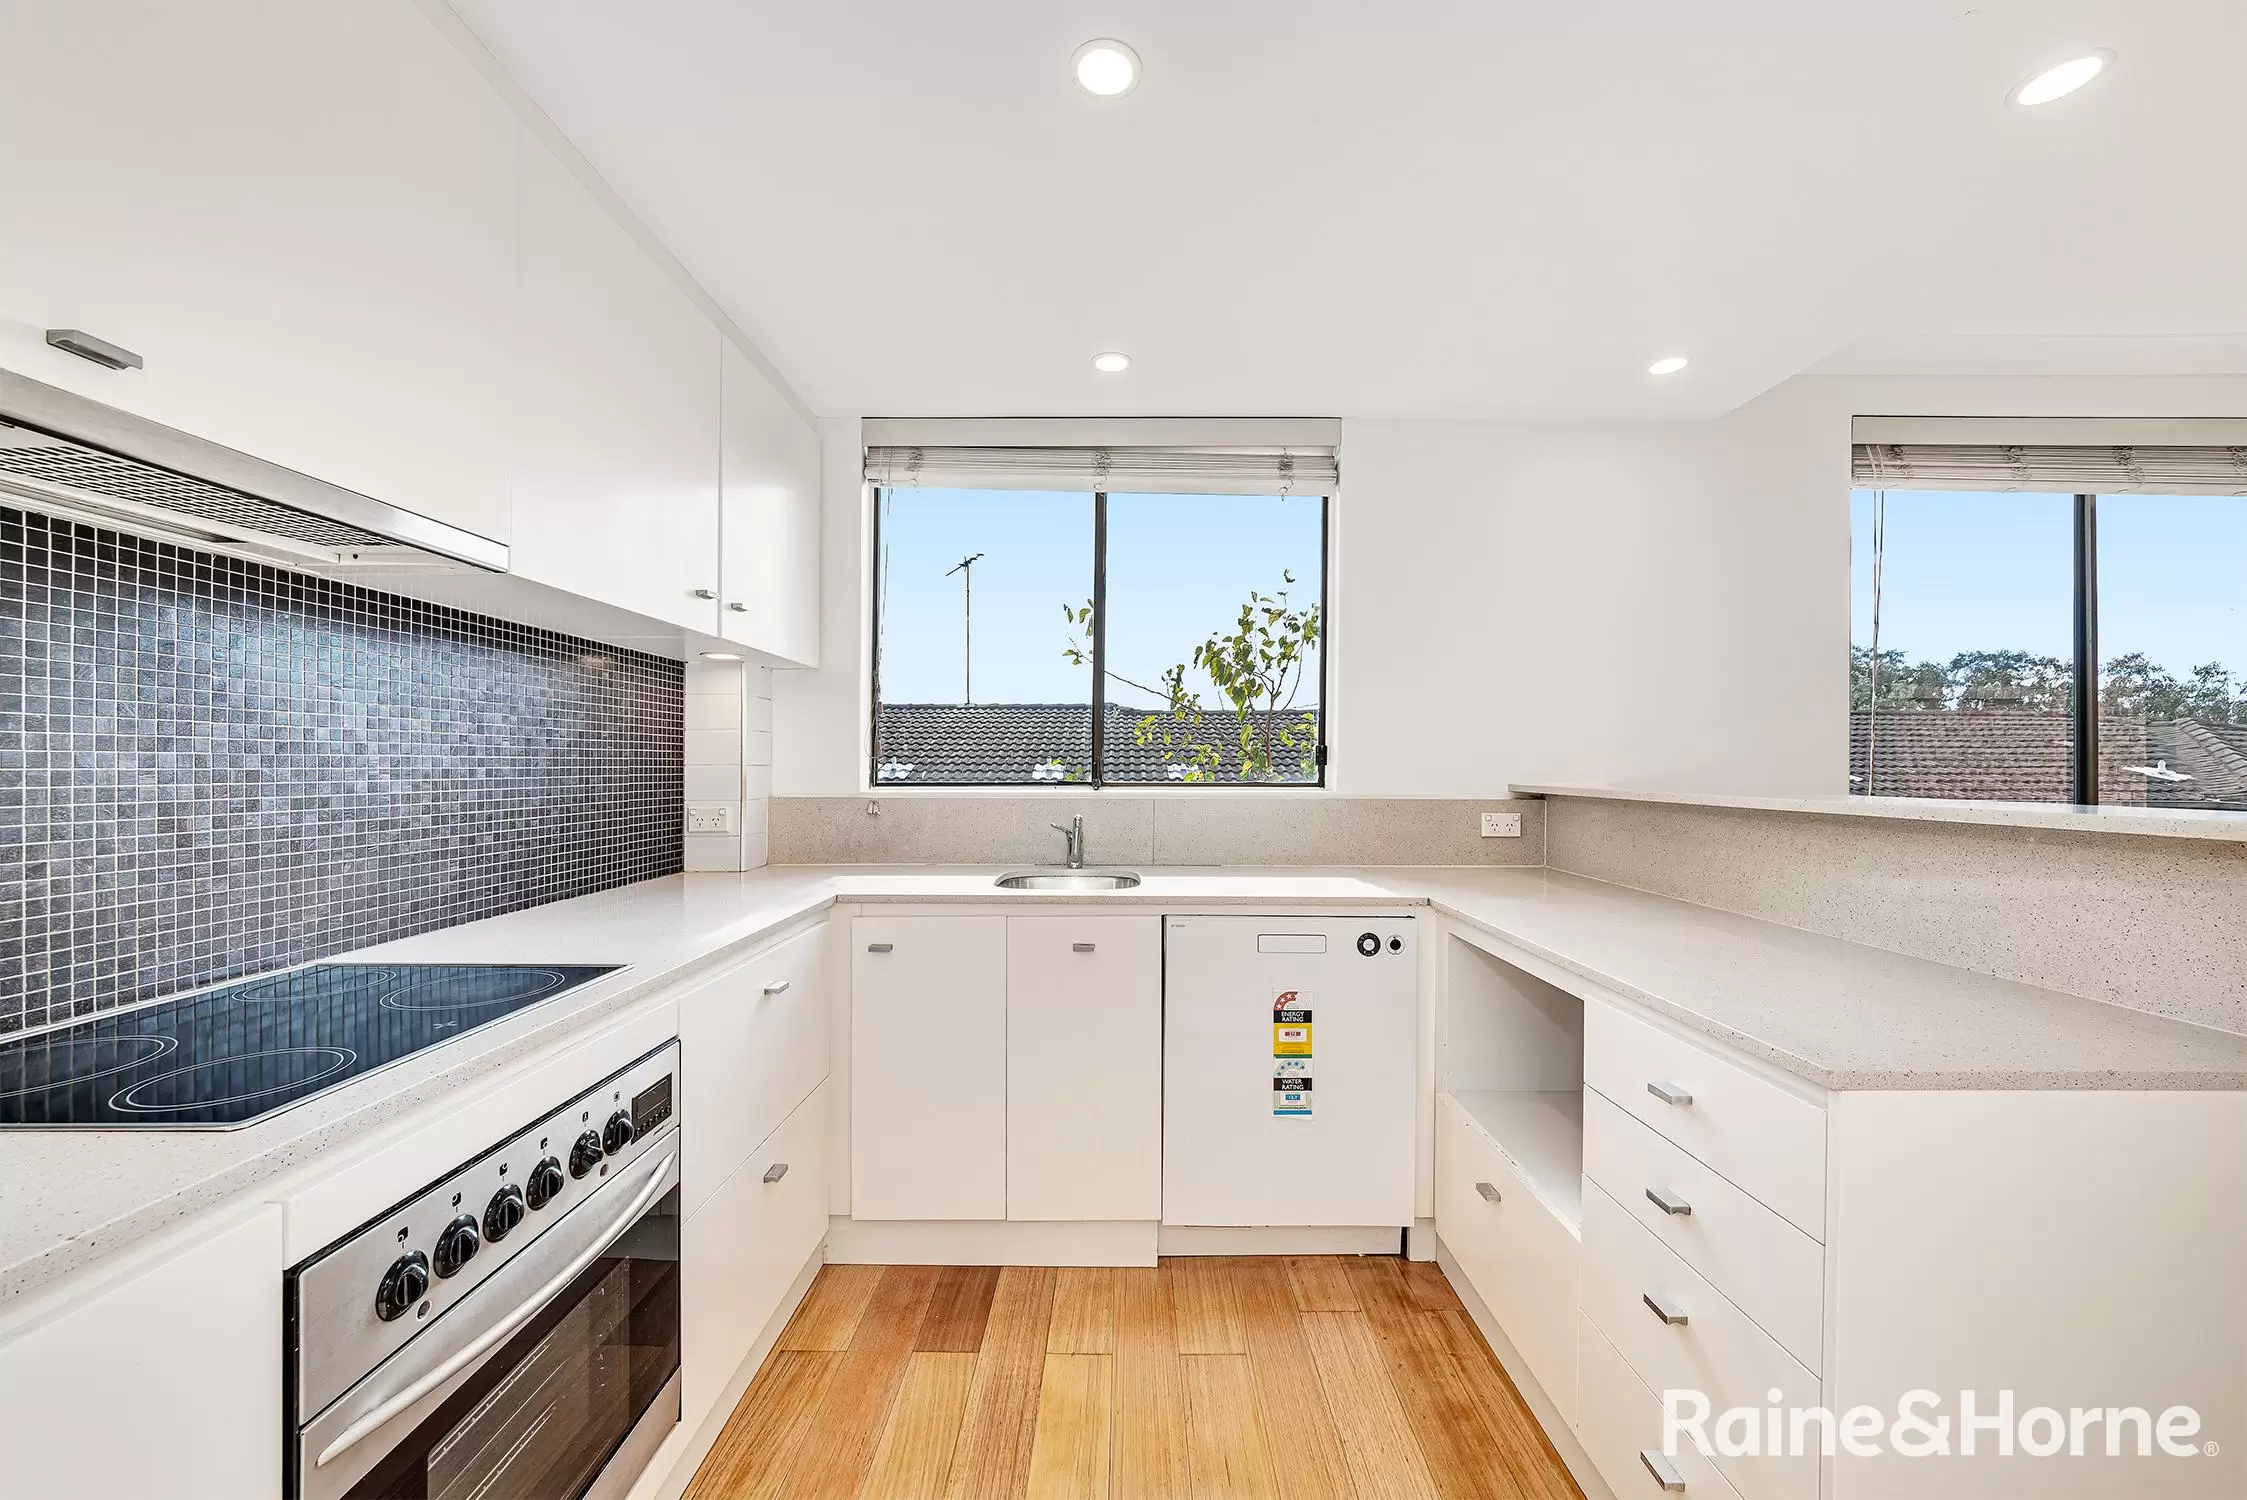 6/84 Melody Street, Coogee Leased by Raine & Horne Randwick | Coogee - image 2